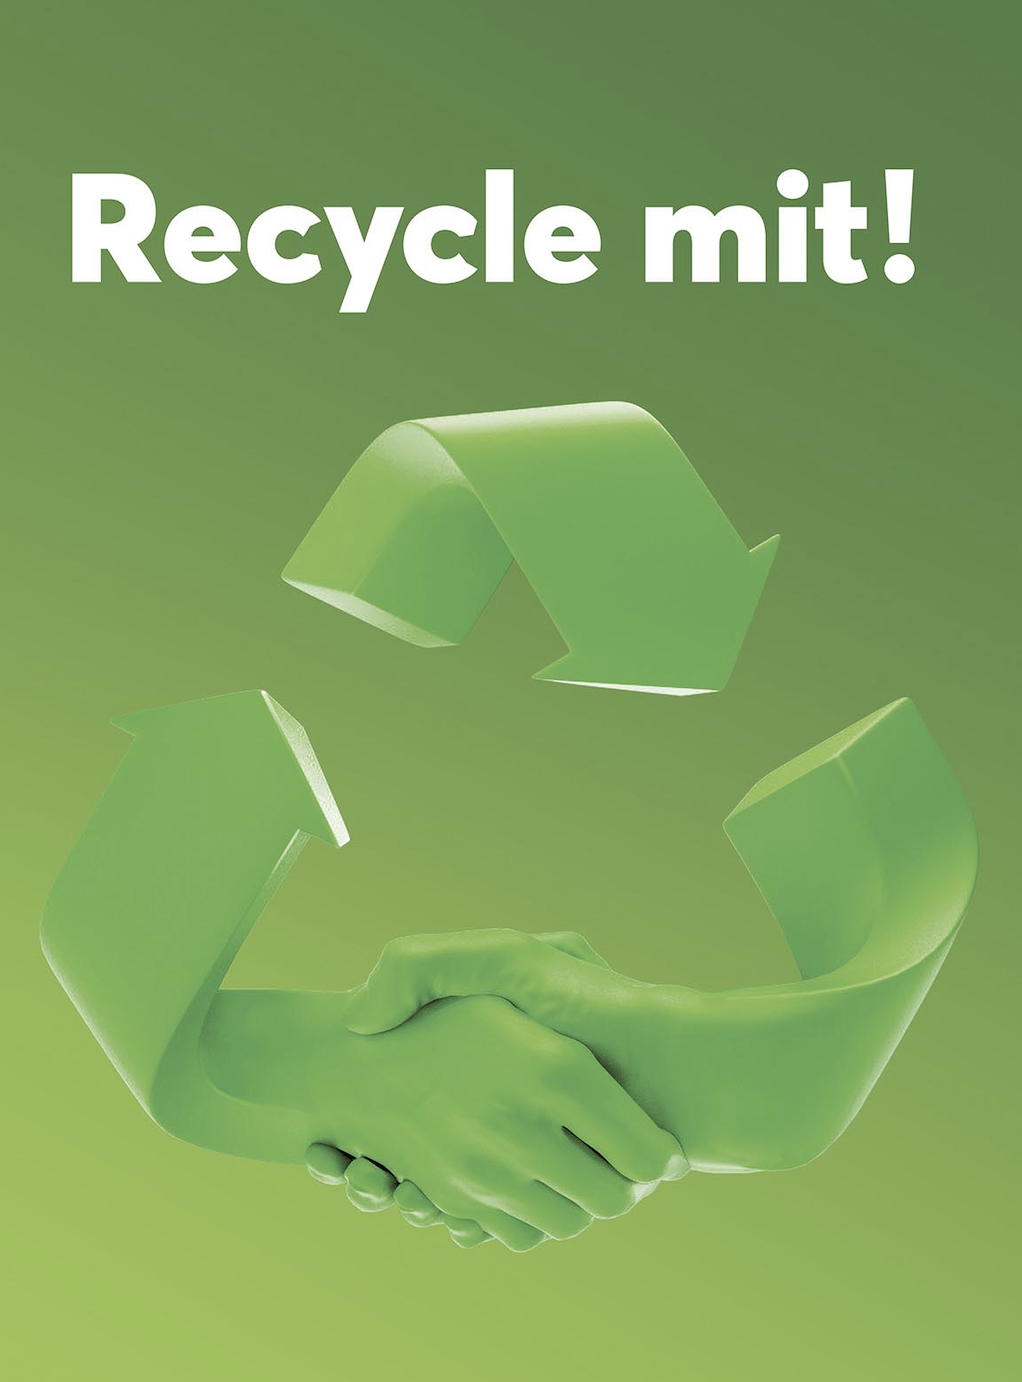 “Recycle Mit